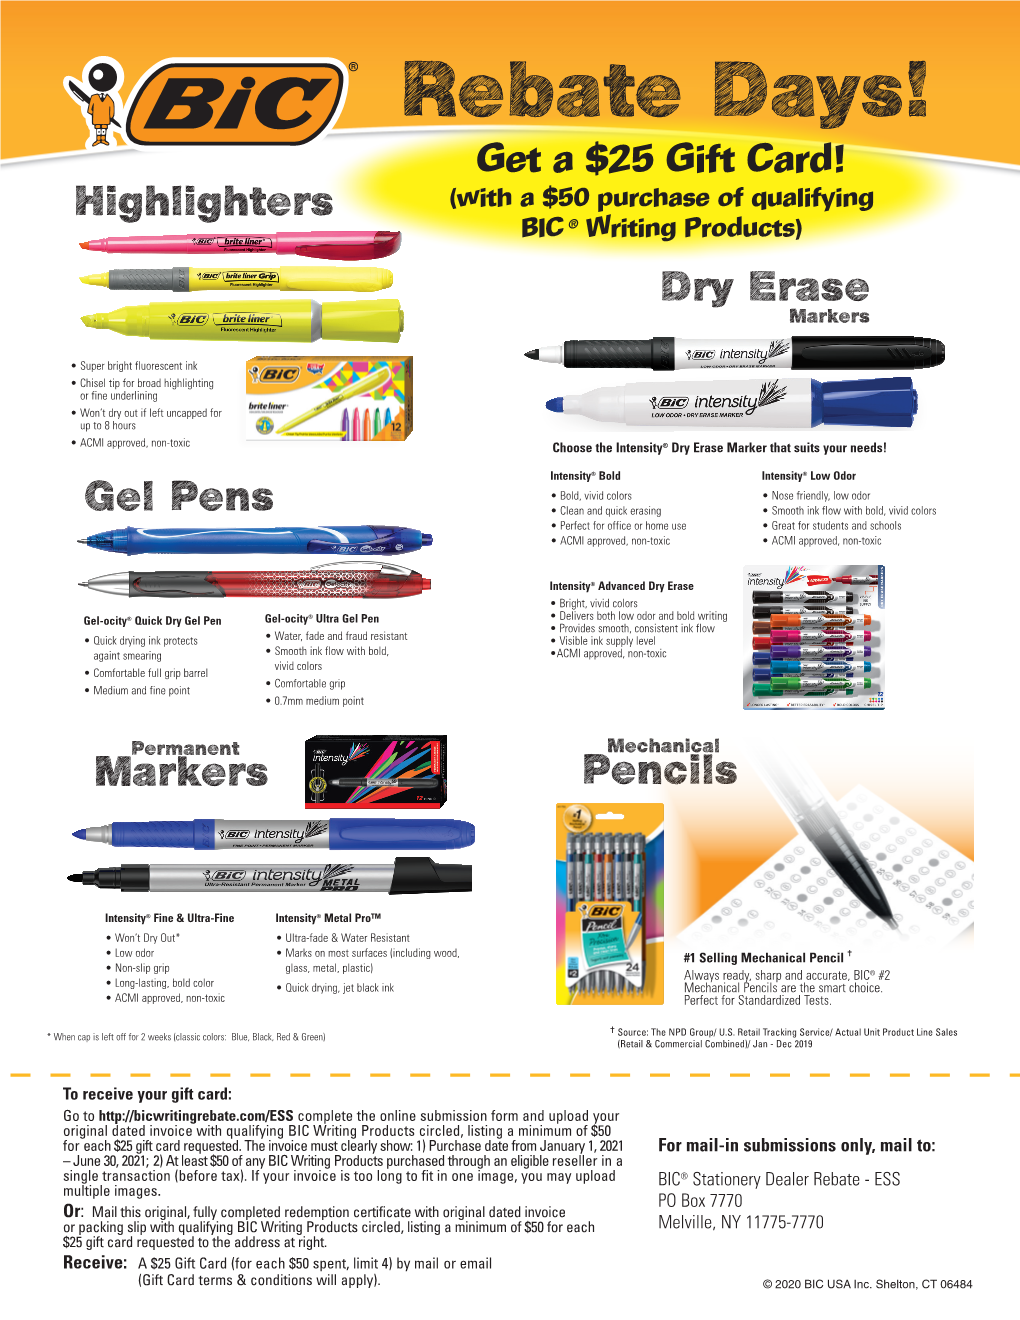 Rebate Days! Get a $25 Gift Card! Highlighters (With a $50 Purchase of Qualifying BIC ® Writing Products) Dry Erase Markers